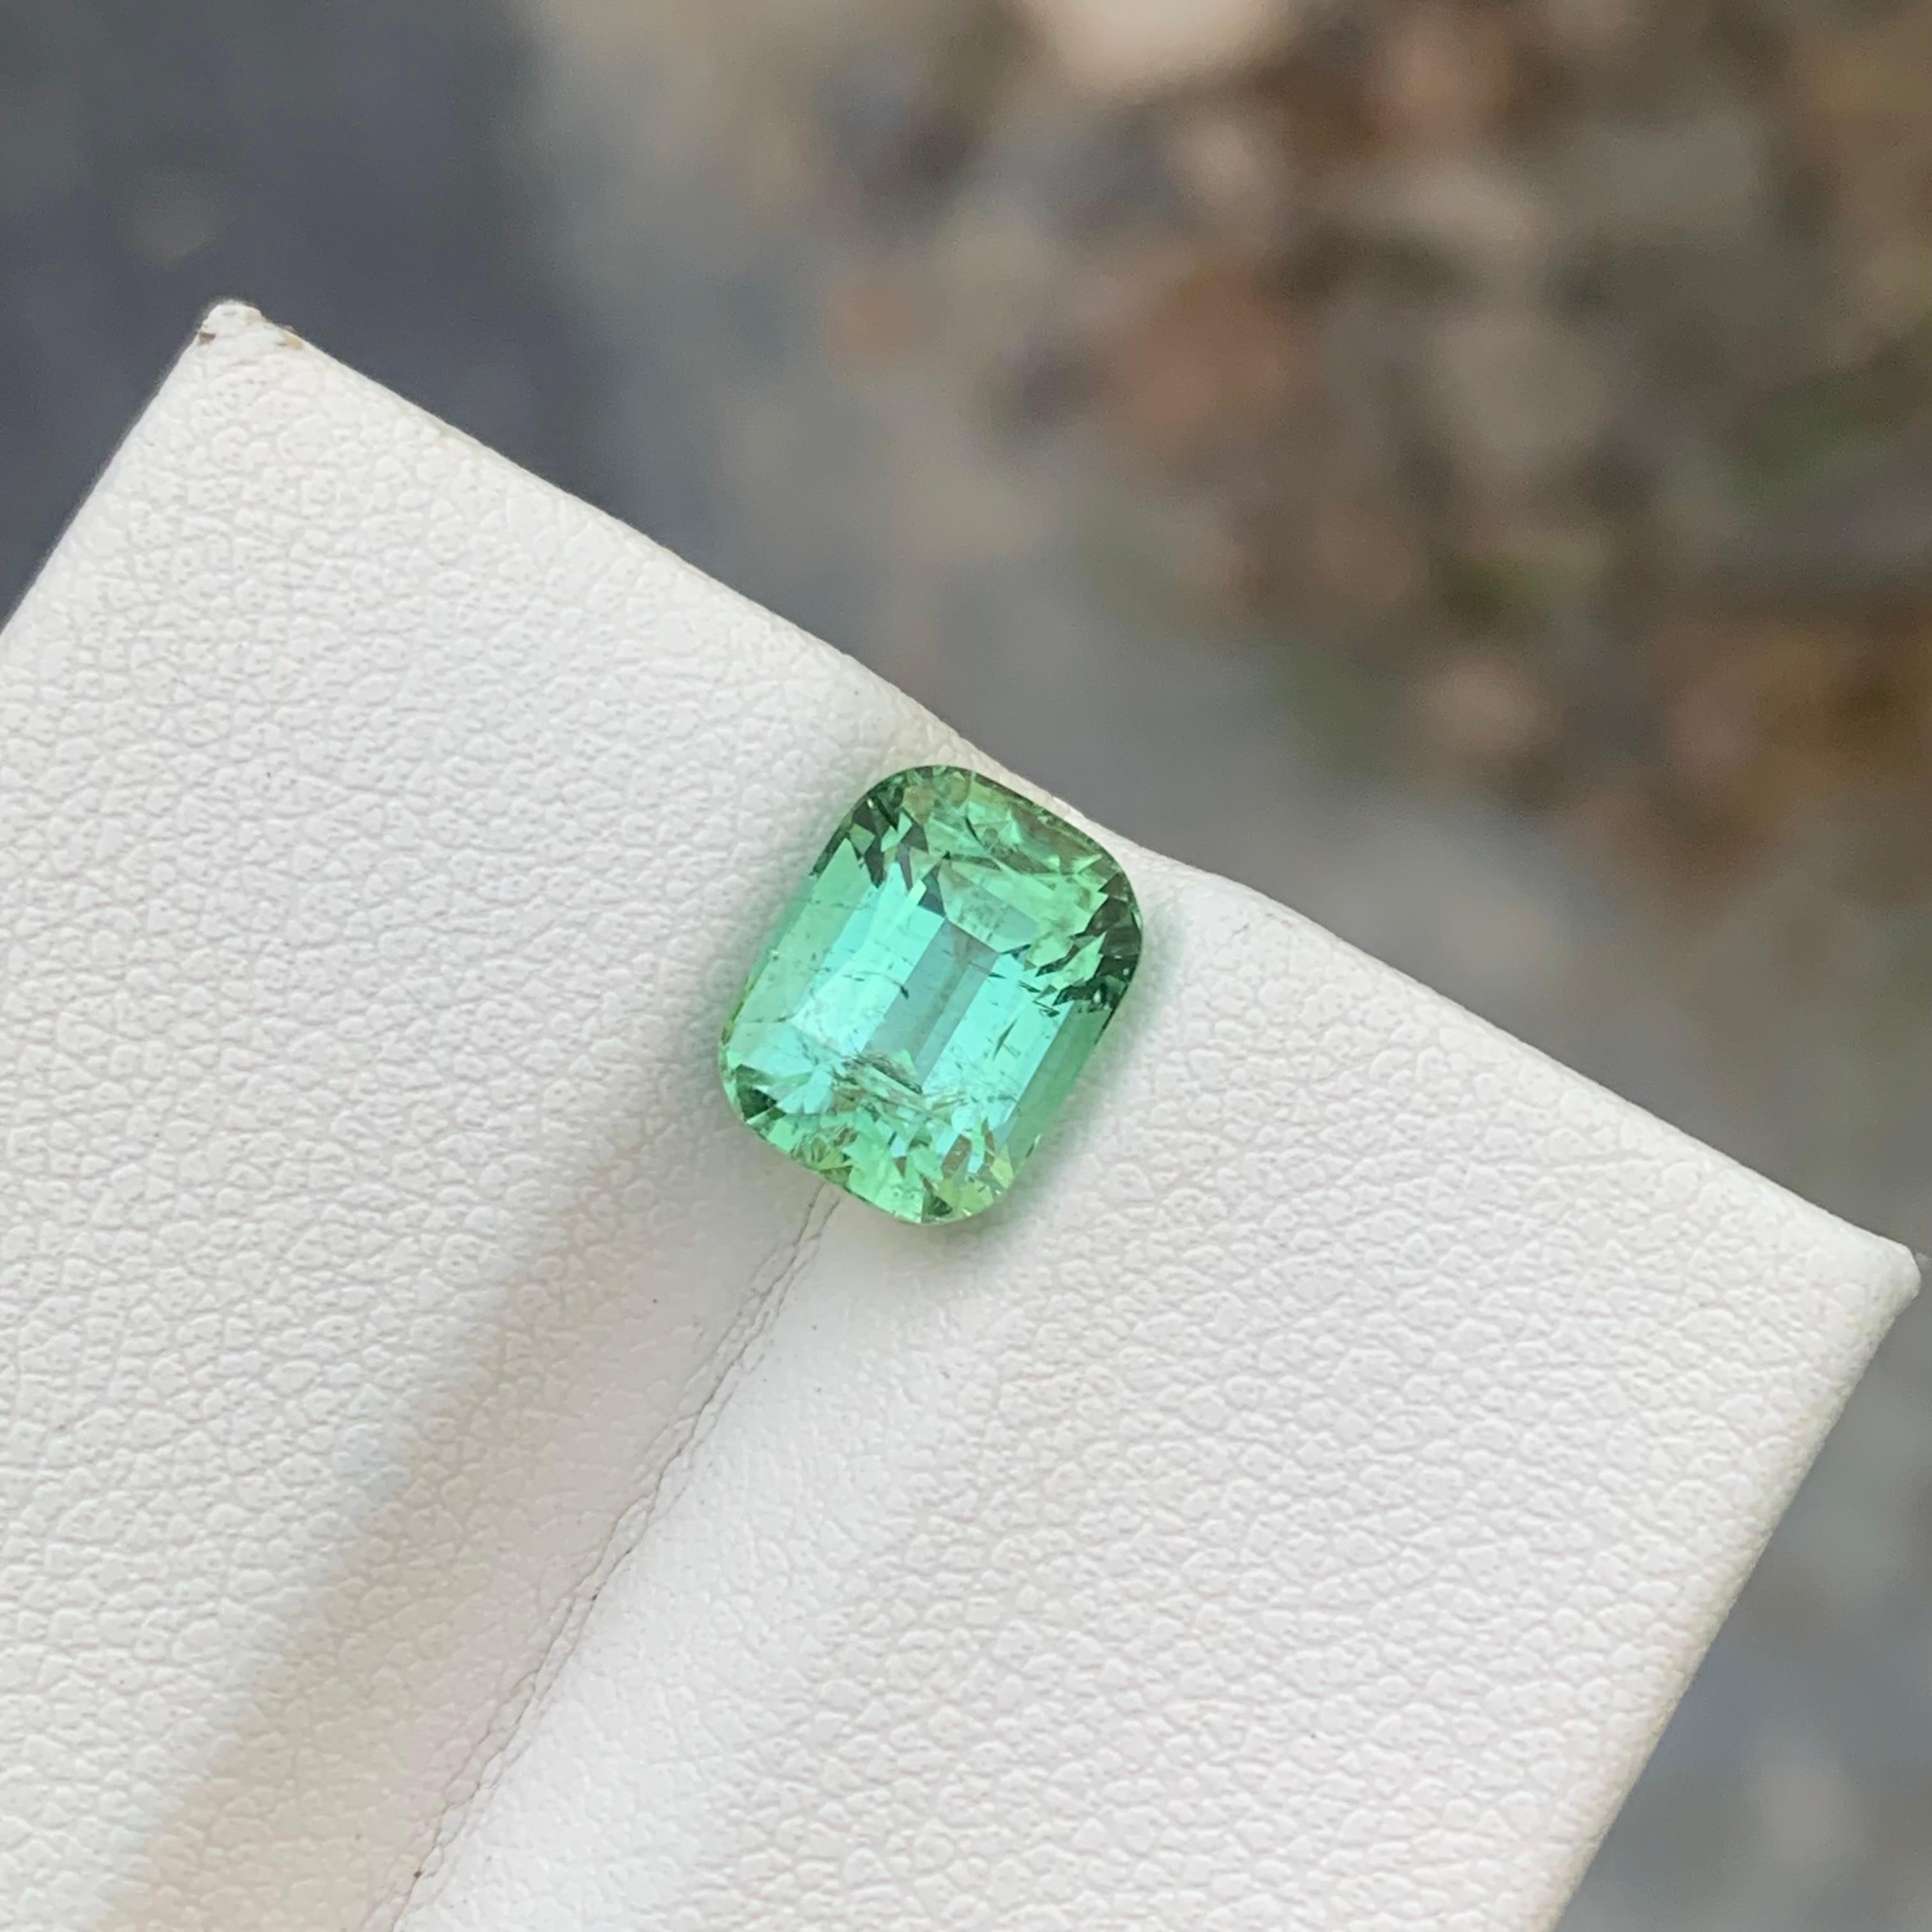 Loose Tourmaline 
Weight: 3.10 Carats 
Dimension: 9.1x7x6.2 Mm
Origin: Kunar Afghanistan 
Shape: Cushion
Color: Mint Green 
Treatment: Non
Certificate: On Demand
Mint green tourmaline, a variety of the colorful tourmaline gem family, is known for